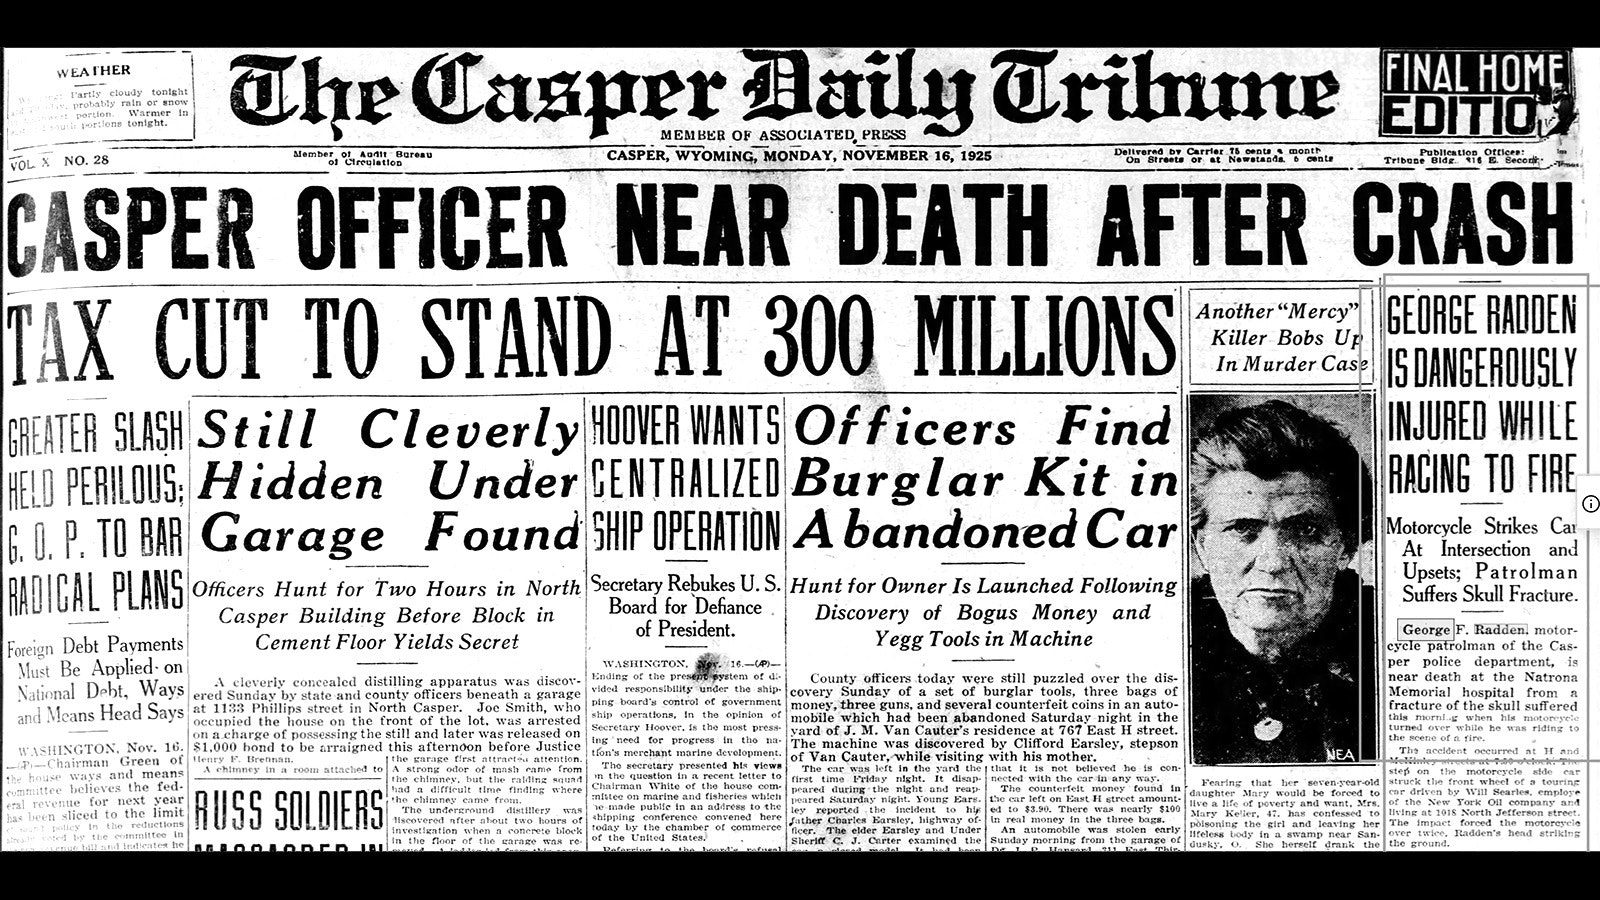 The Casper Daily Tribune had a banner headline announcing the crash and impending death of Casper Police Officer George Radden.